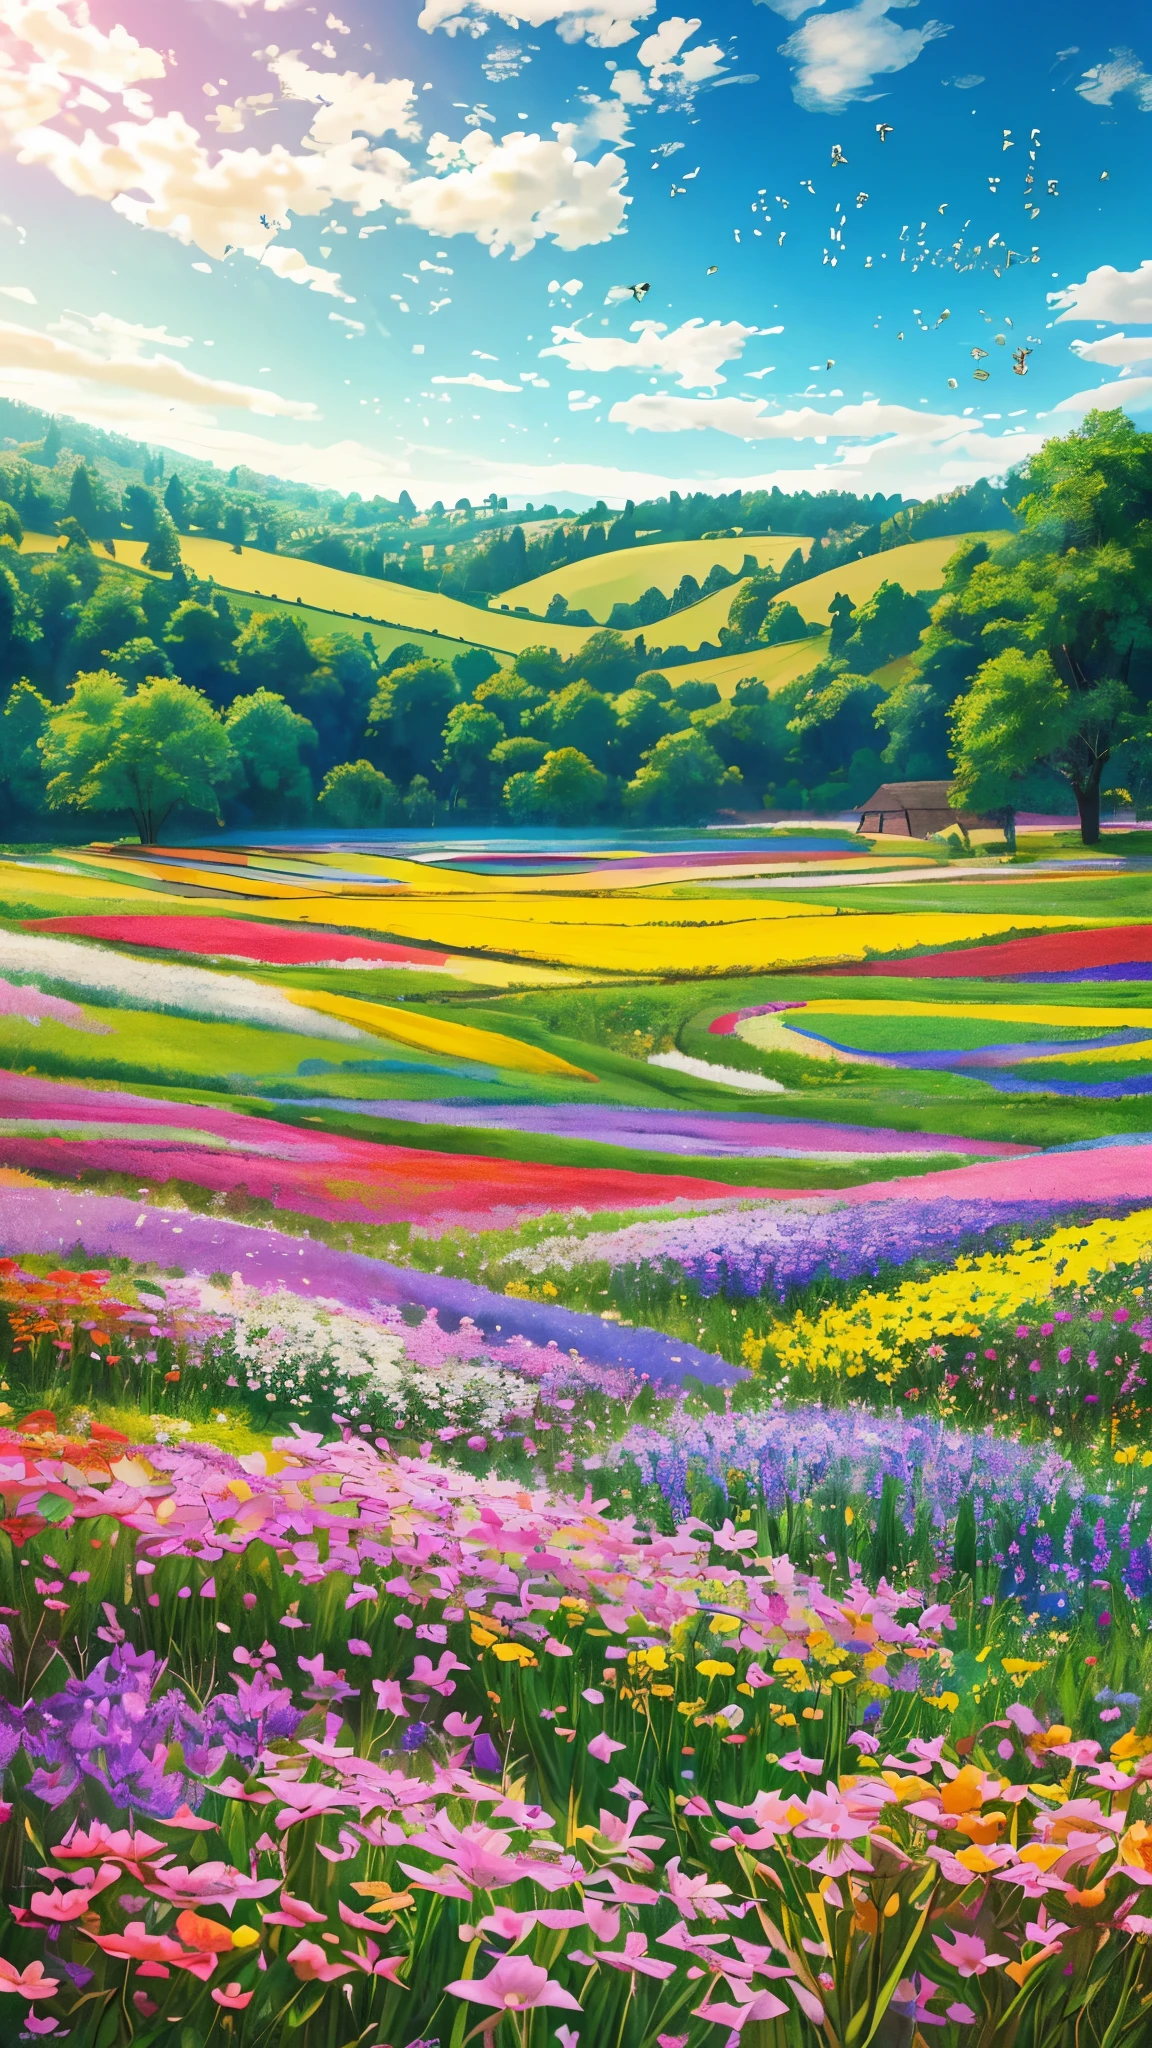 (best quality,4k,8k,highres,masterpiece:1.2),vibrantly colorful flower field,gorgeous meadow with blooming flowers,nature's beauty showcased in a vibrant landscape,lush green field dotted with colorful flowers,joyful celebration of nature's beauty,(realistic,photorealistic,photo-realistic:1.37) depiction of a picturesque flower field,splashes of color in a serene green meadow,mesmerizing floral tapestry under the blue sky,an idyllic scene of blooming flowers in a lush green countryside,vivid and detailed portrayal of a flower-filled field

[illustration,3D rendering],capturing nature's beauty with a stunning illustration,a beautifully crafted 3D rendering of a flower field,a vibrant digital artwork showcasing colorful flowers,[photography,concept artists] inspired photo-realistic portrayal of a scenic flower field,a conceptual artwork capturing the essence of a flower-filled meadow,a photographer's vision brought to life in a vibrant floral composition

lively atmosphere with bees buzzing and butterflies fluttering around,serene landscape with birds chirping and a gentle breeze rustling through the flowers,nature's symphony with the soft sound of wind passing through the field,whispers of nature as the wind gently rustles the blooms,tranquil nature scene with the sound of buzzing insects and singing birds,a lively ecosystem filled with the harmony of buzzing bees and chirping birds

vivid and vibrant colors that pop from the canvas,vibrant hues that bring the flowers to life,rich and diverse color palette showcasing the beauty of nature's creations,an explosion of colors that create a visually stunning display,an array of vibrant and contrasting colors that captivate the eye,diverse color scheme that adds depth and visual interest to the scene

soft and warm lighting that bathes the field in a golden glow,gentle sunlight casting a warm glow on the blooming flowers,natural lighting accentuating the beauty of the flower field,soft sunlight filtering through the leaves